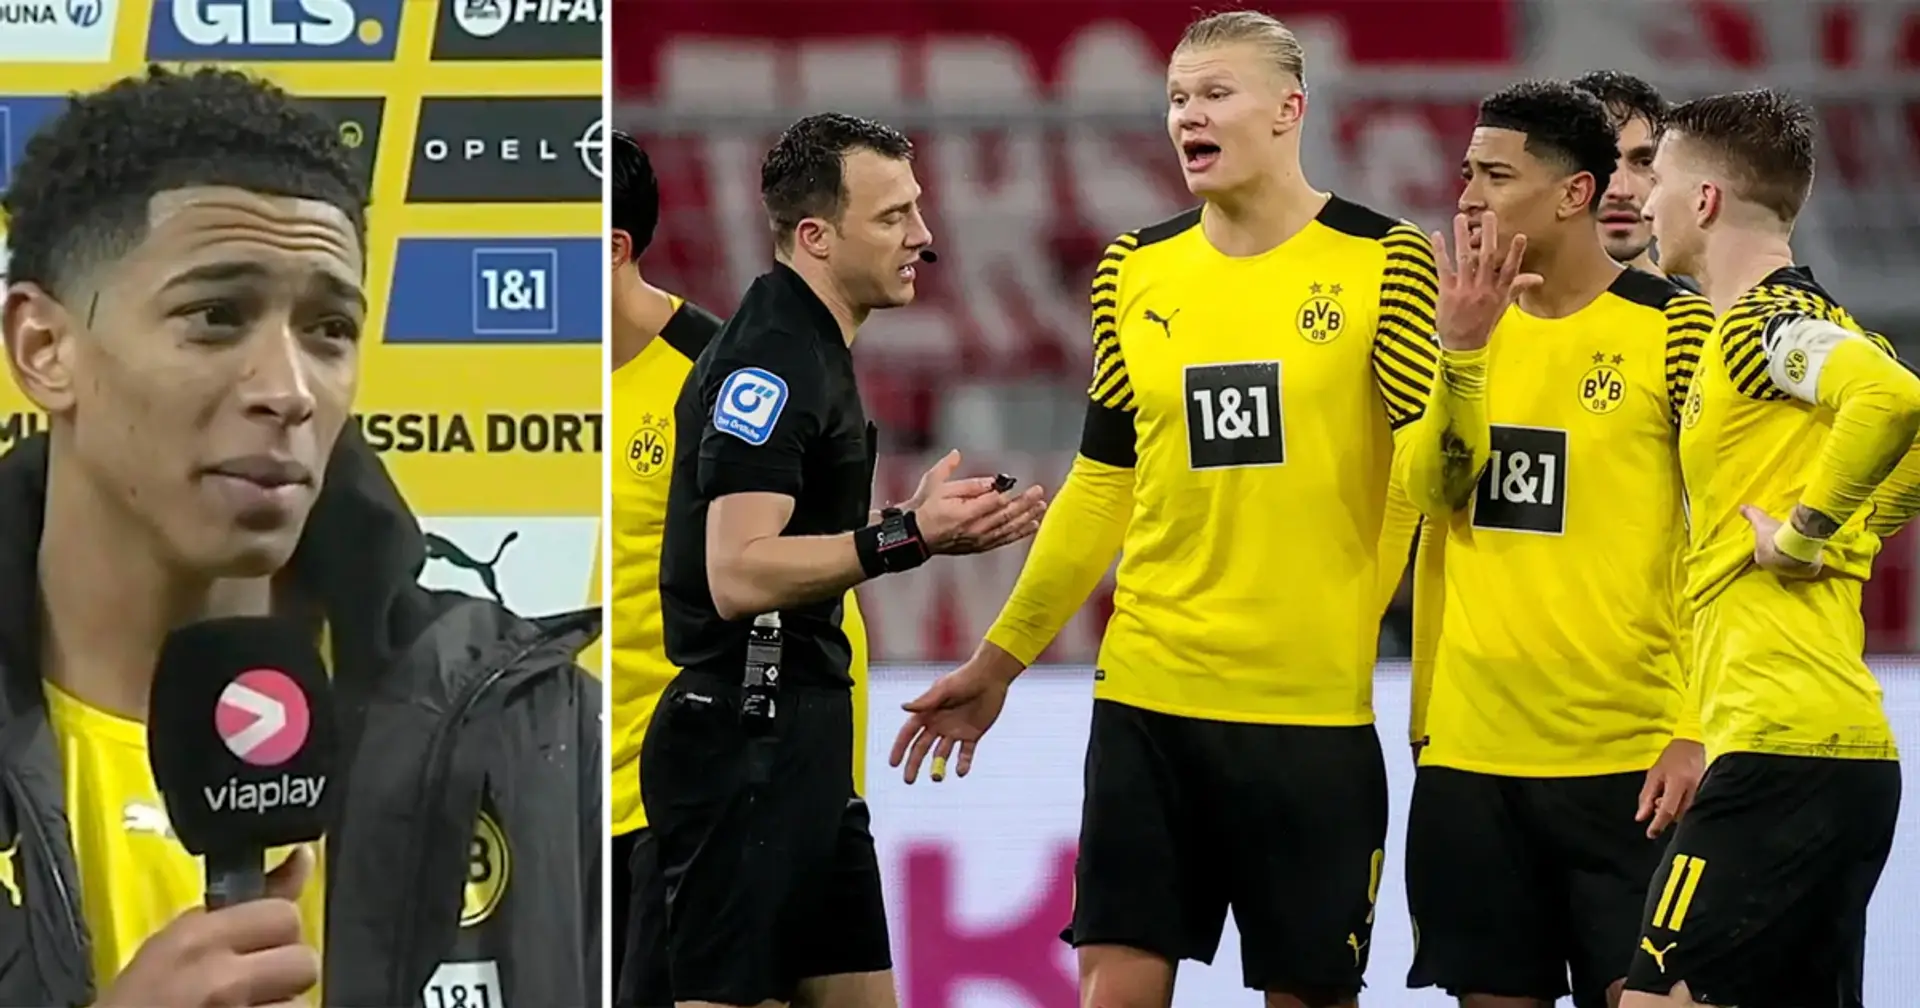 Jude Bellingham slams 'referee who match-fixed before' for penalty call in Dortmund's defeat to Bayern